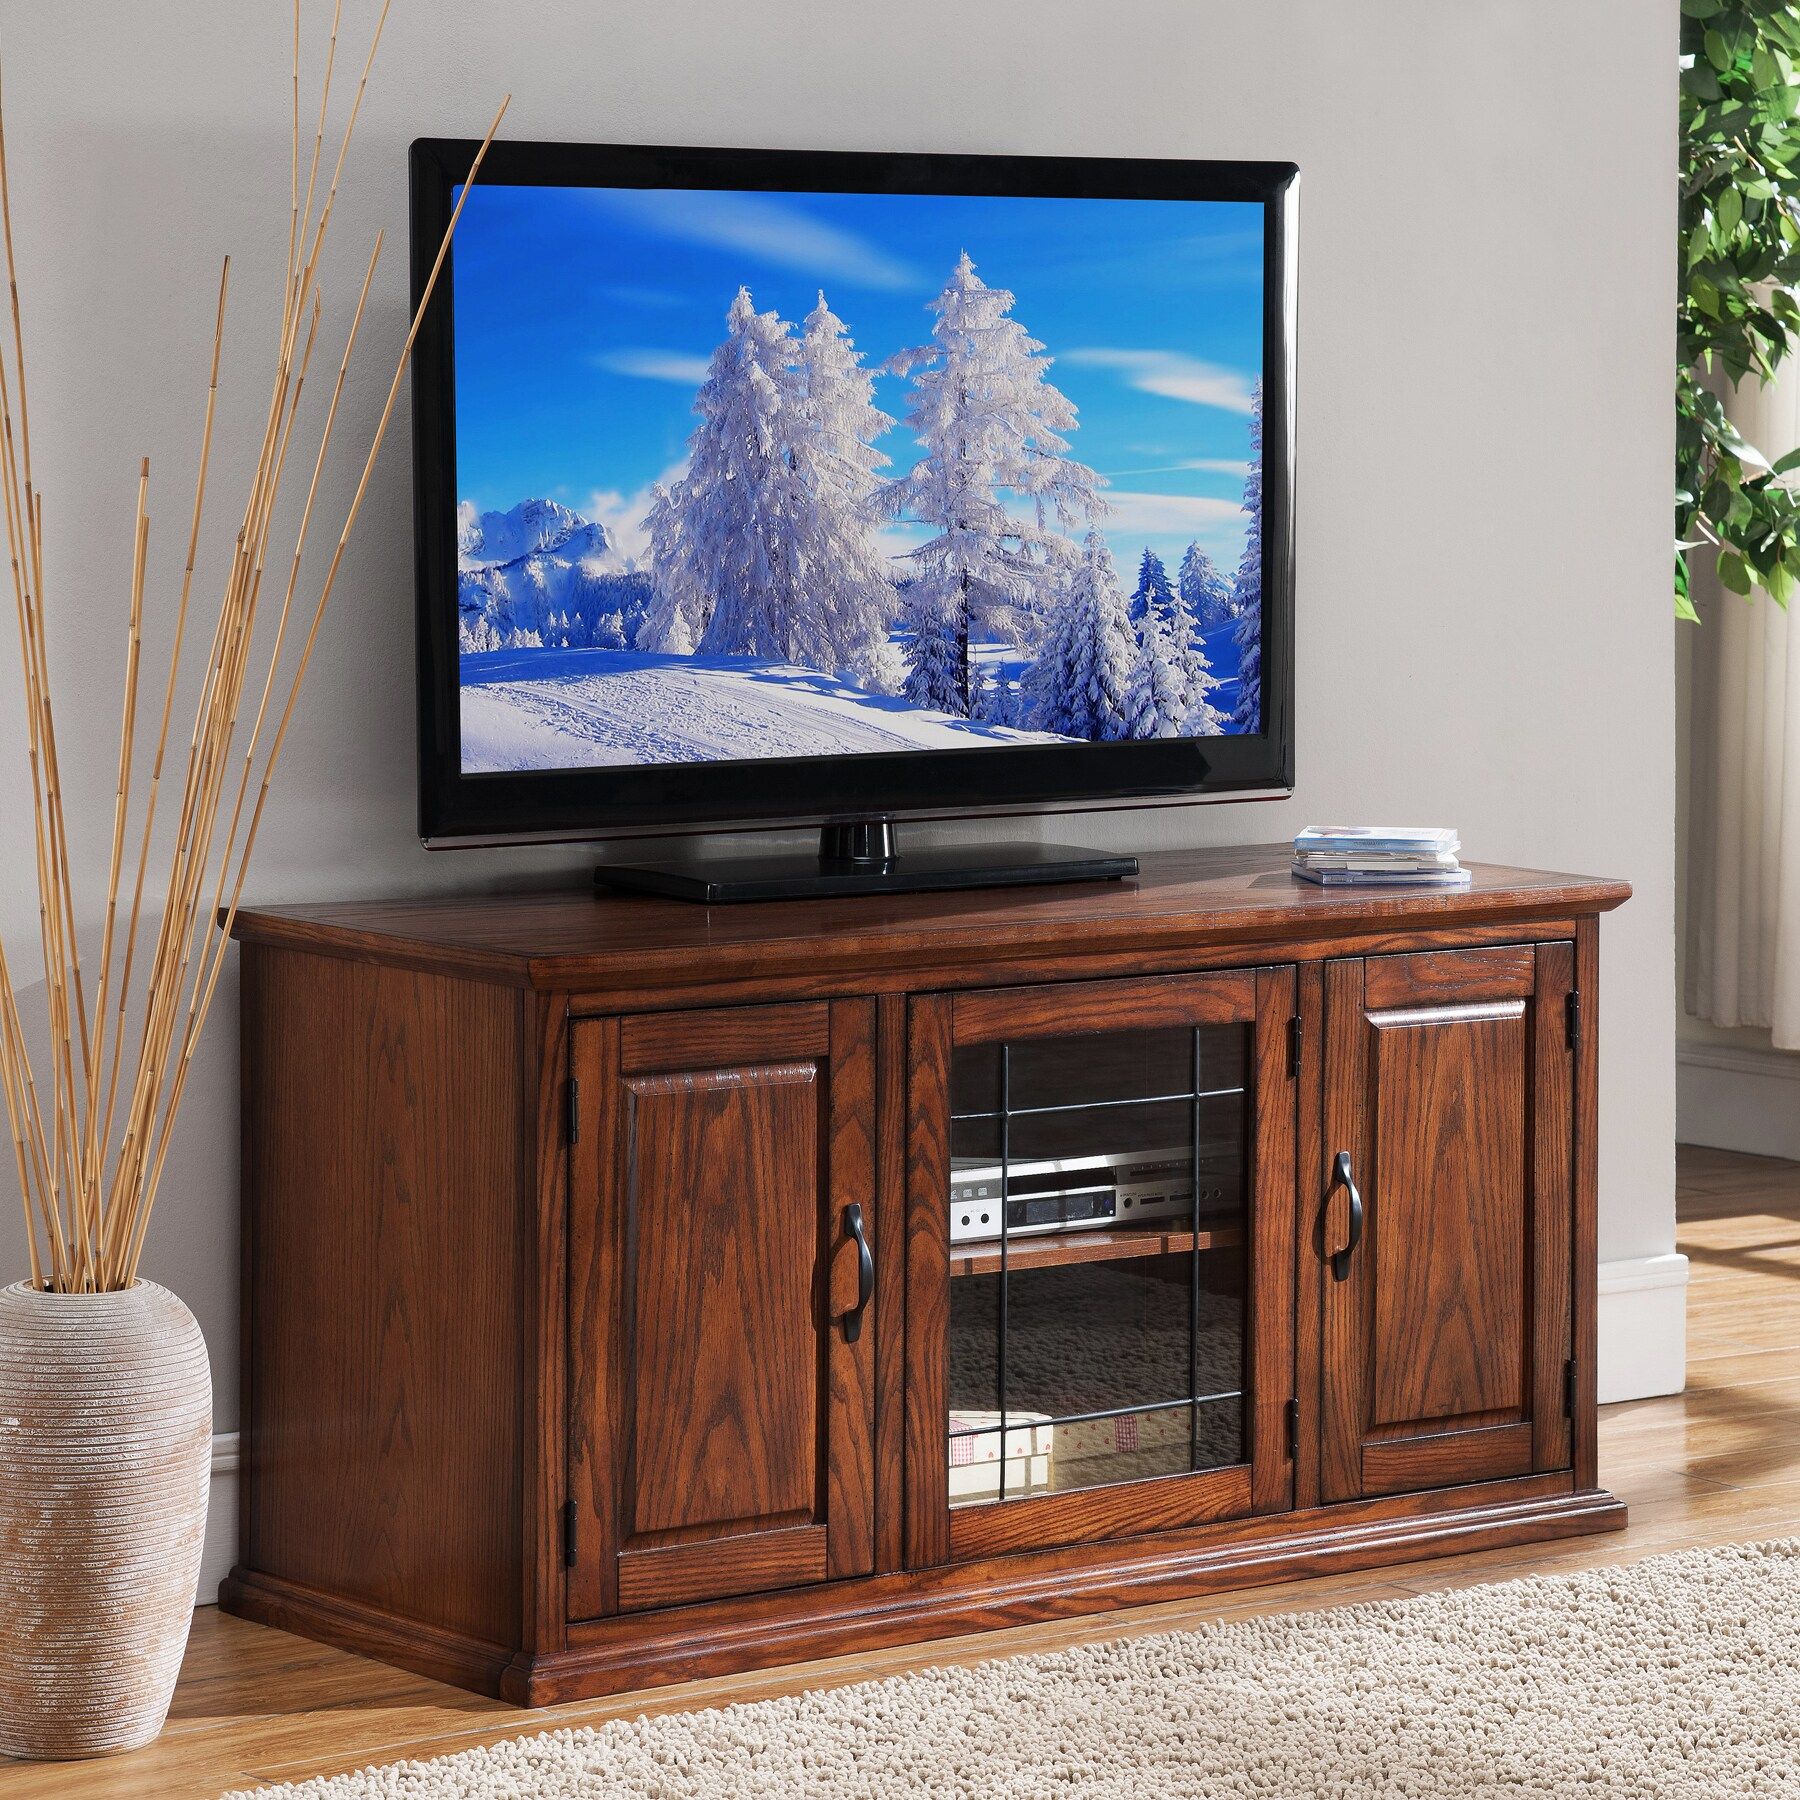 Shop Oak Wood/glass 50 Inch Leaded Tv Stand – Free For Virginia Tv Stands For Tvs Up To 50" (View 4 of 15)